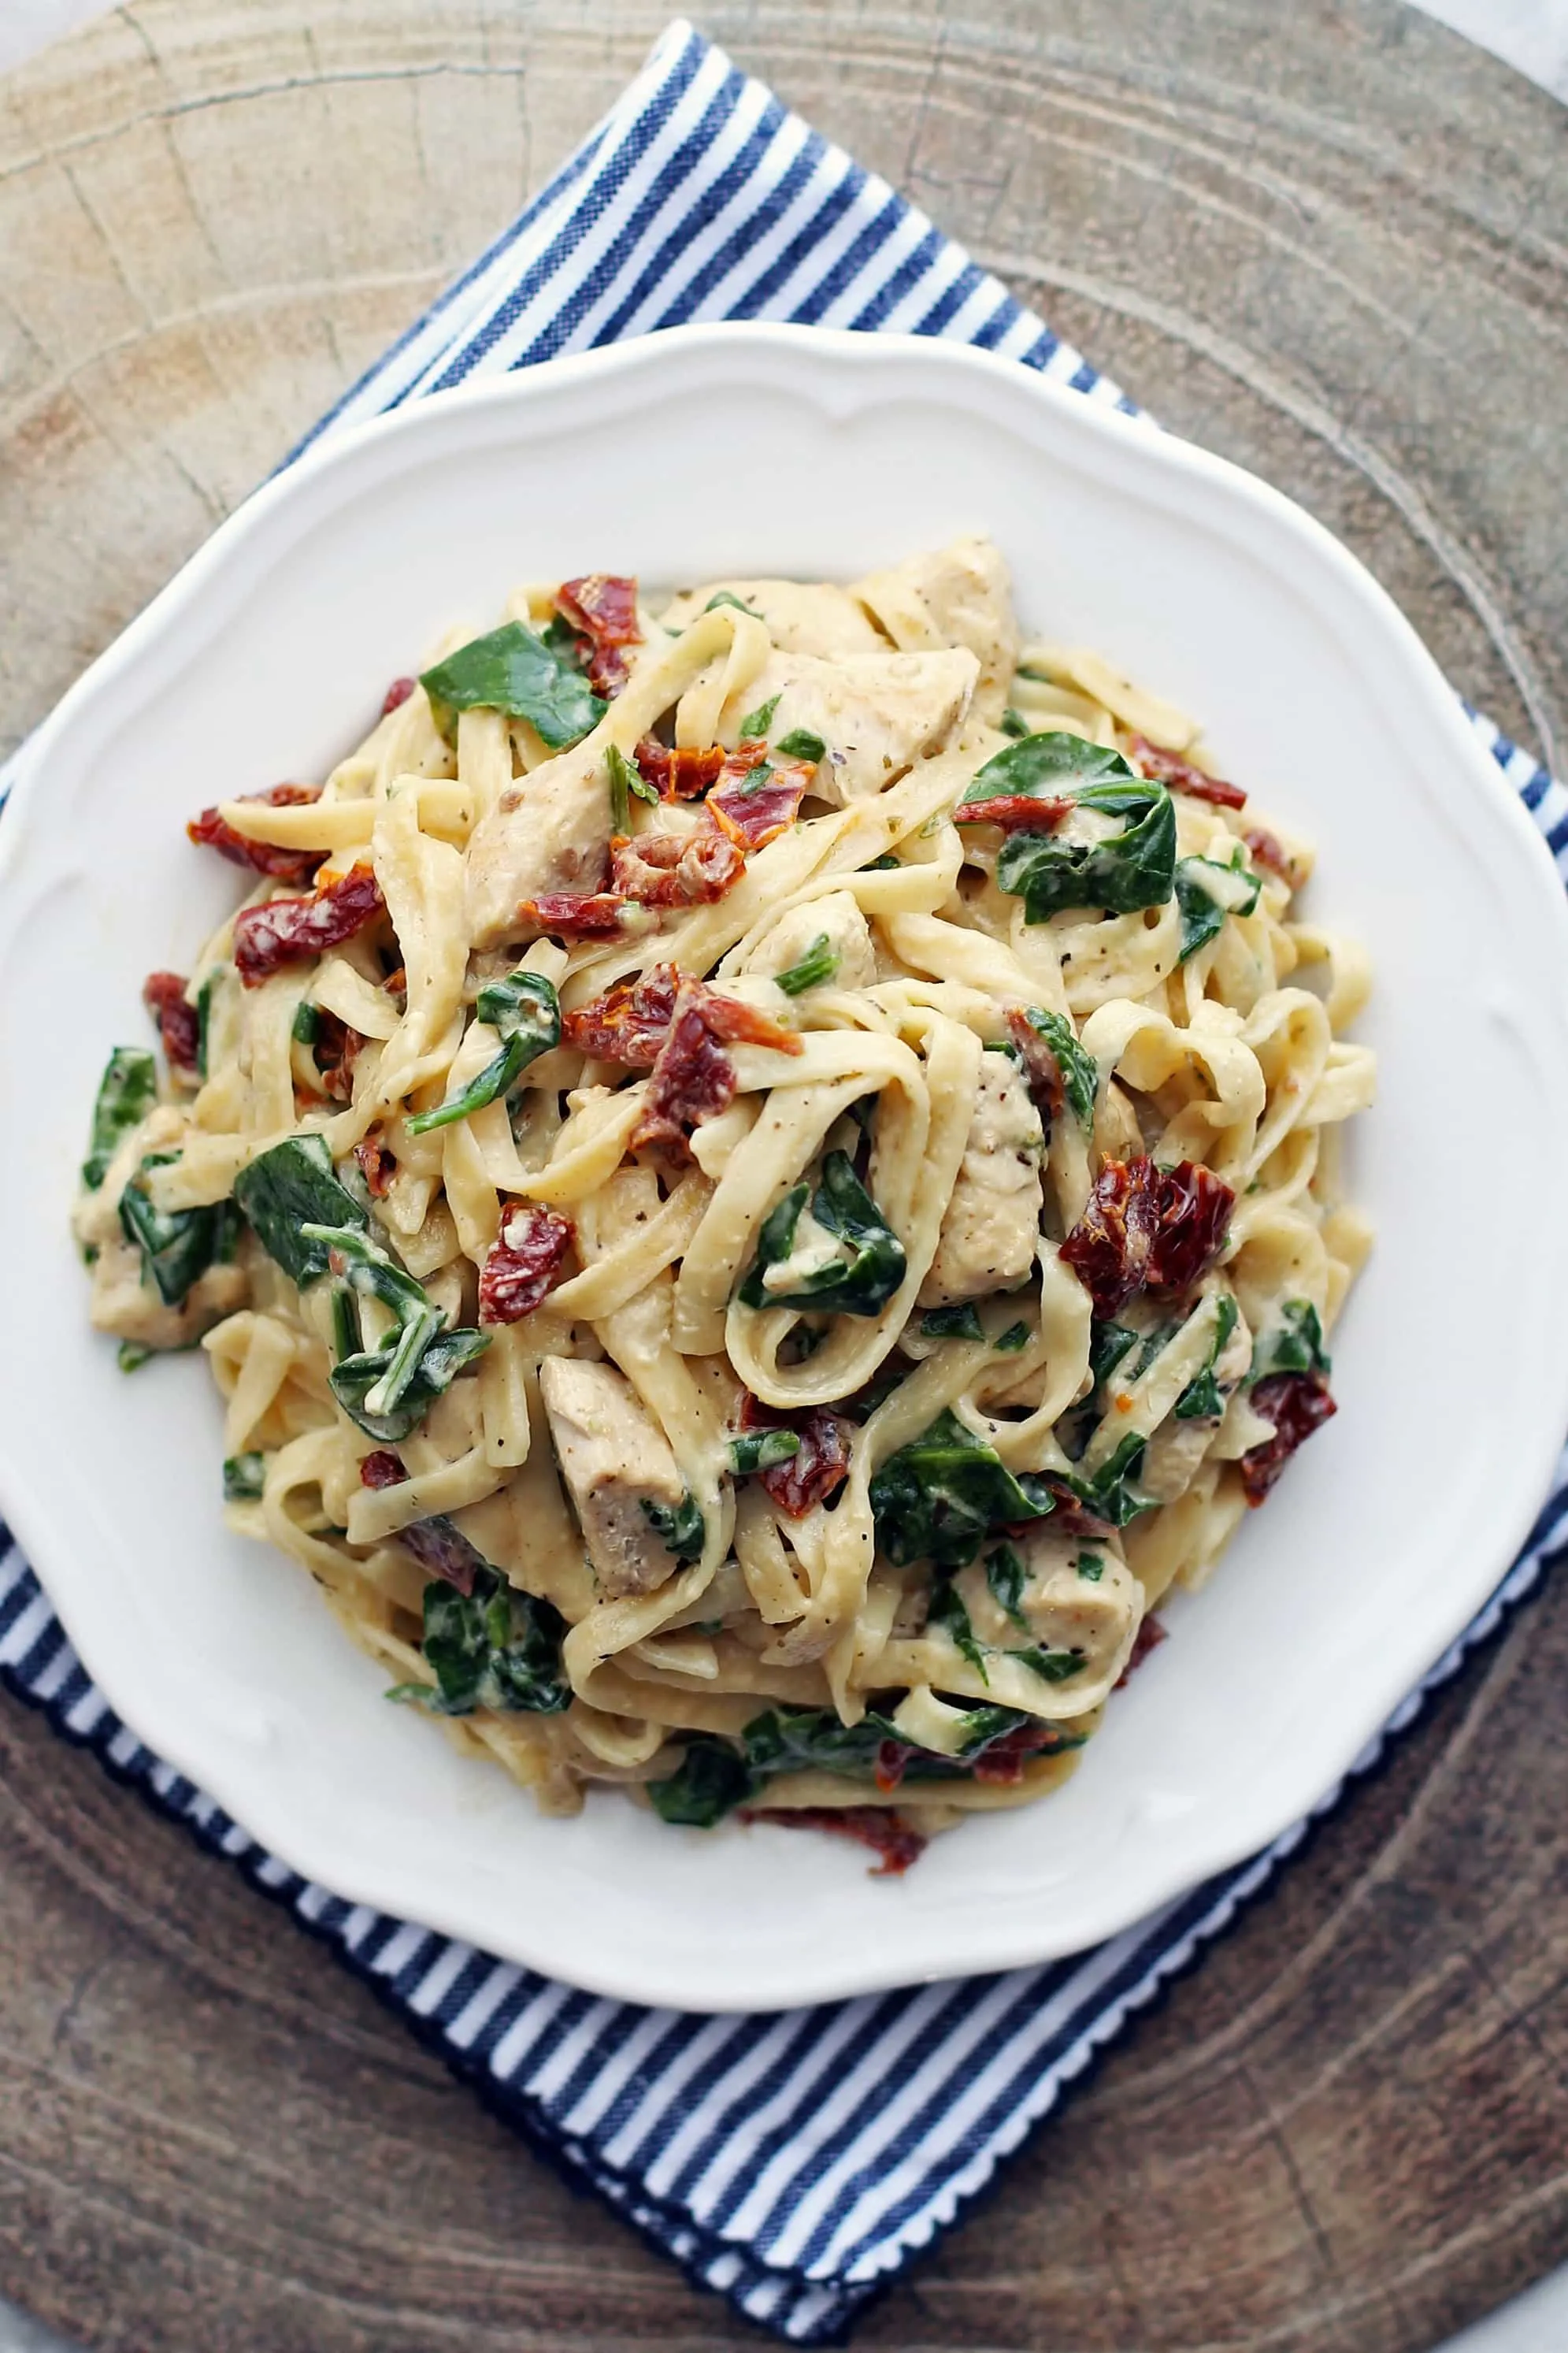 An overhead view of Instant Pot creamy fettuccine with chicken, baby spinach, and sun-dried tomatoes on a white plate.